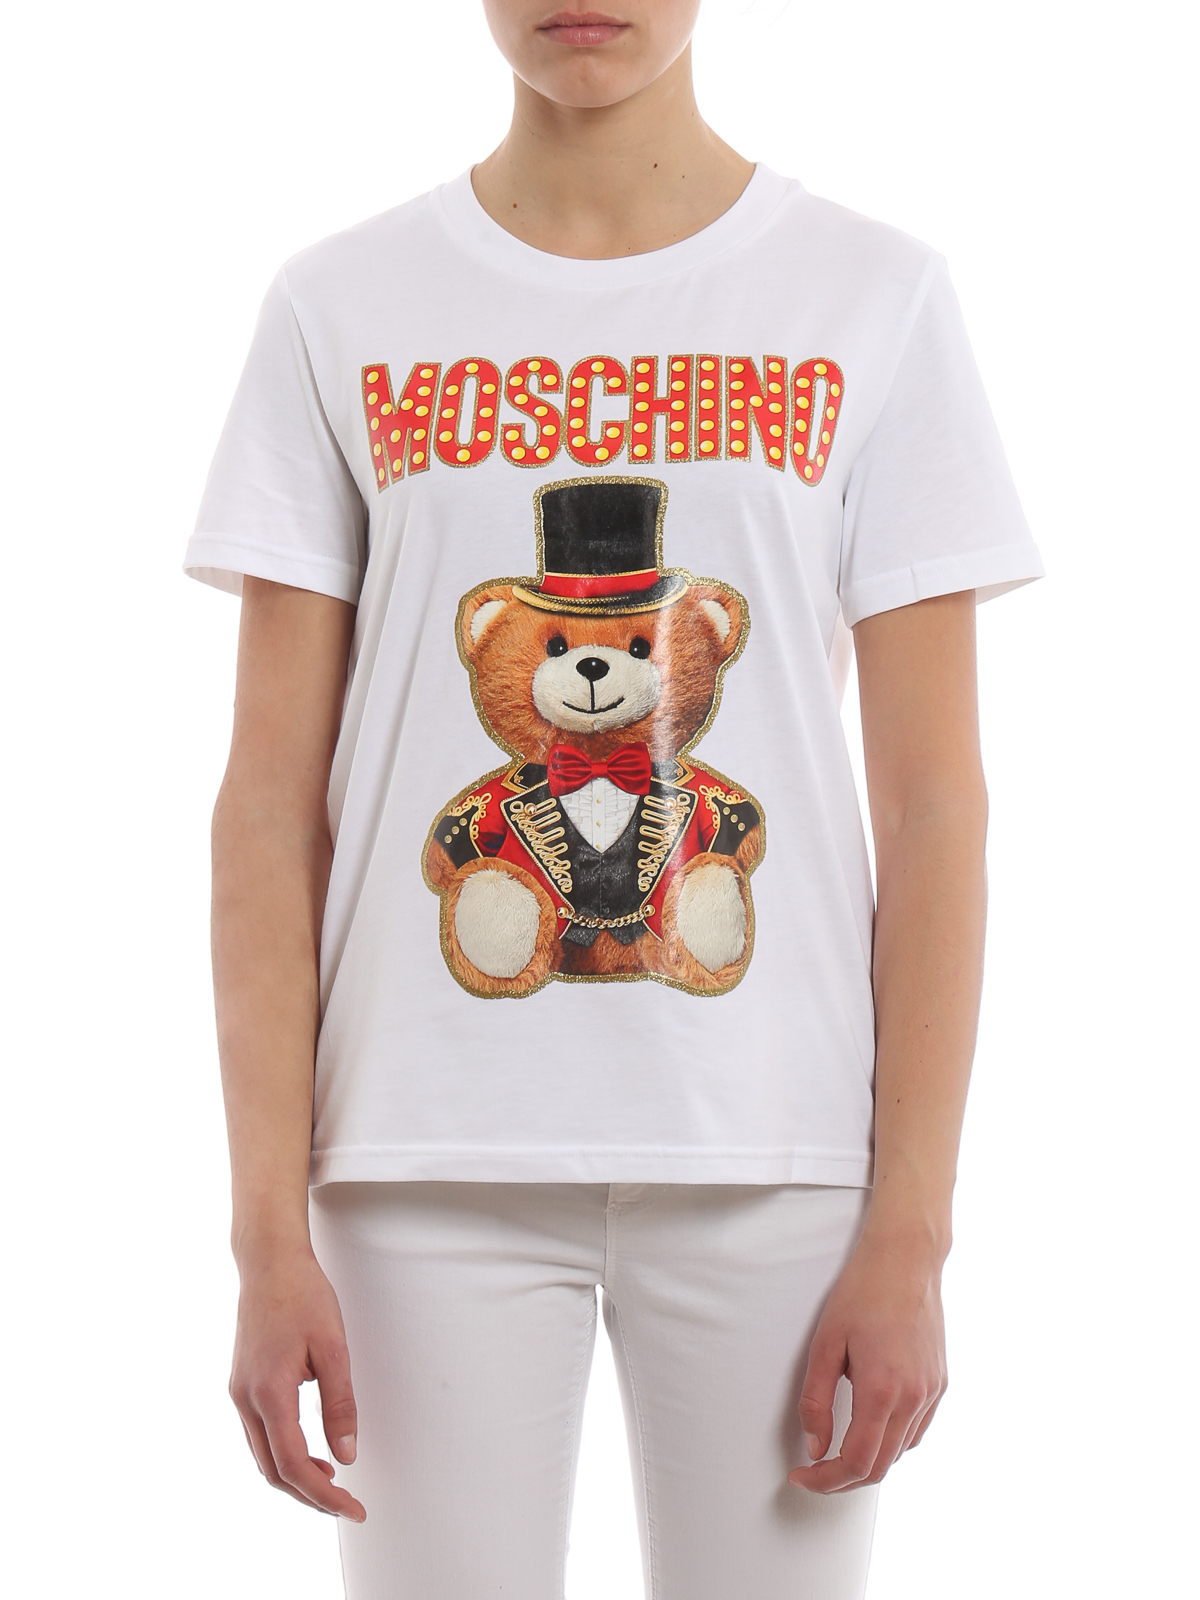 MOSCHINO COUTURE サーカス テディベア tシャツ